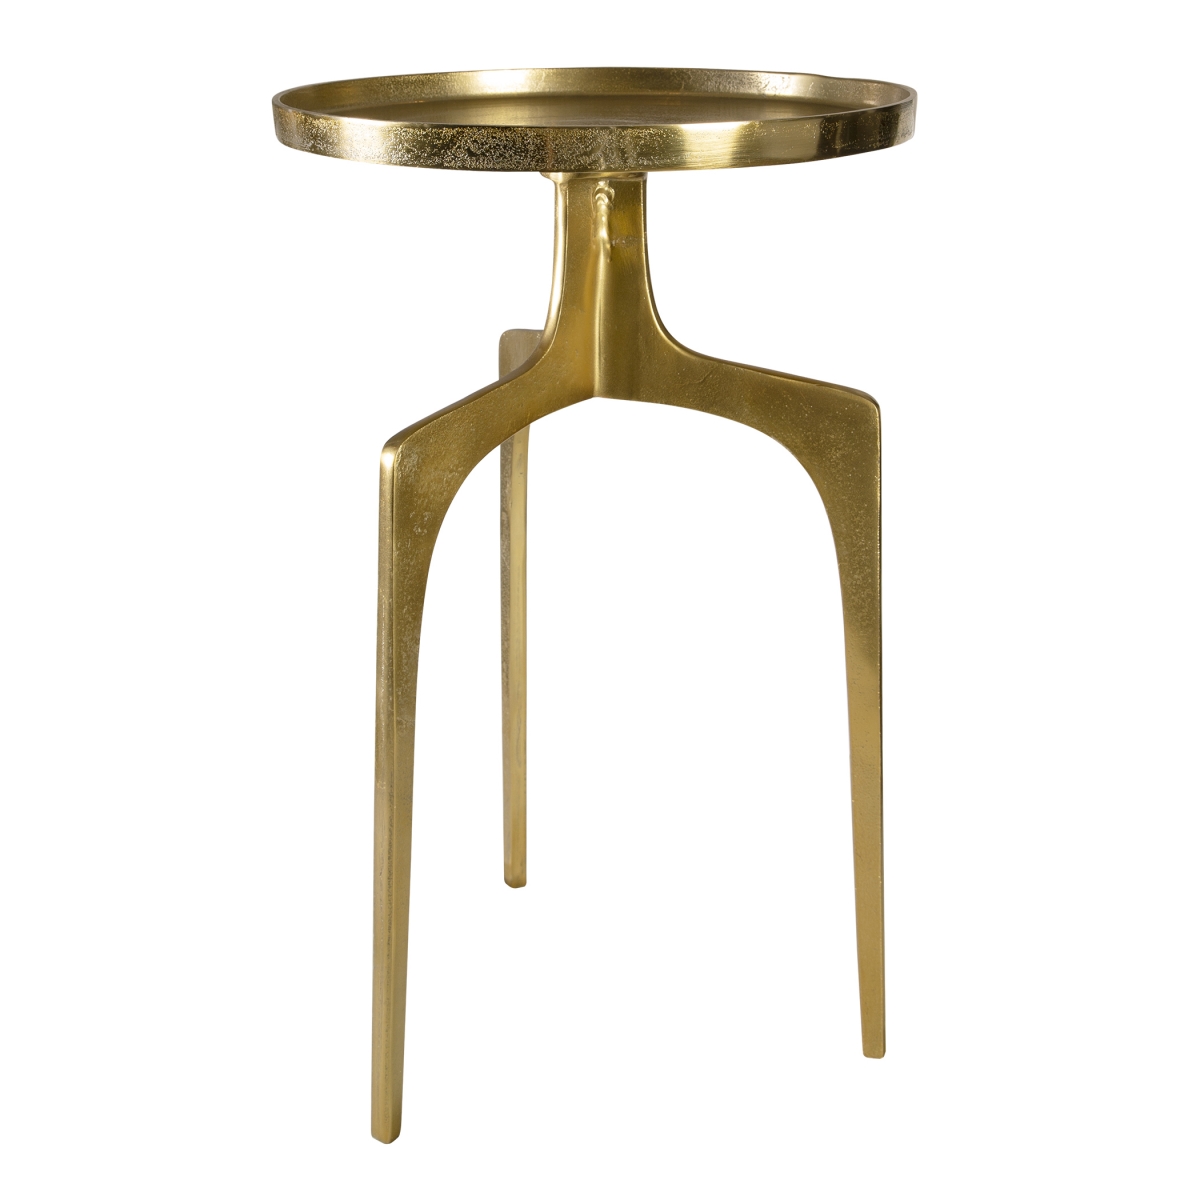 Picture of 212 Main 25053 Kenna Accent Table - 25 x 16 x 16 in.